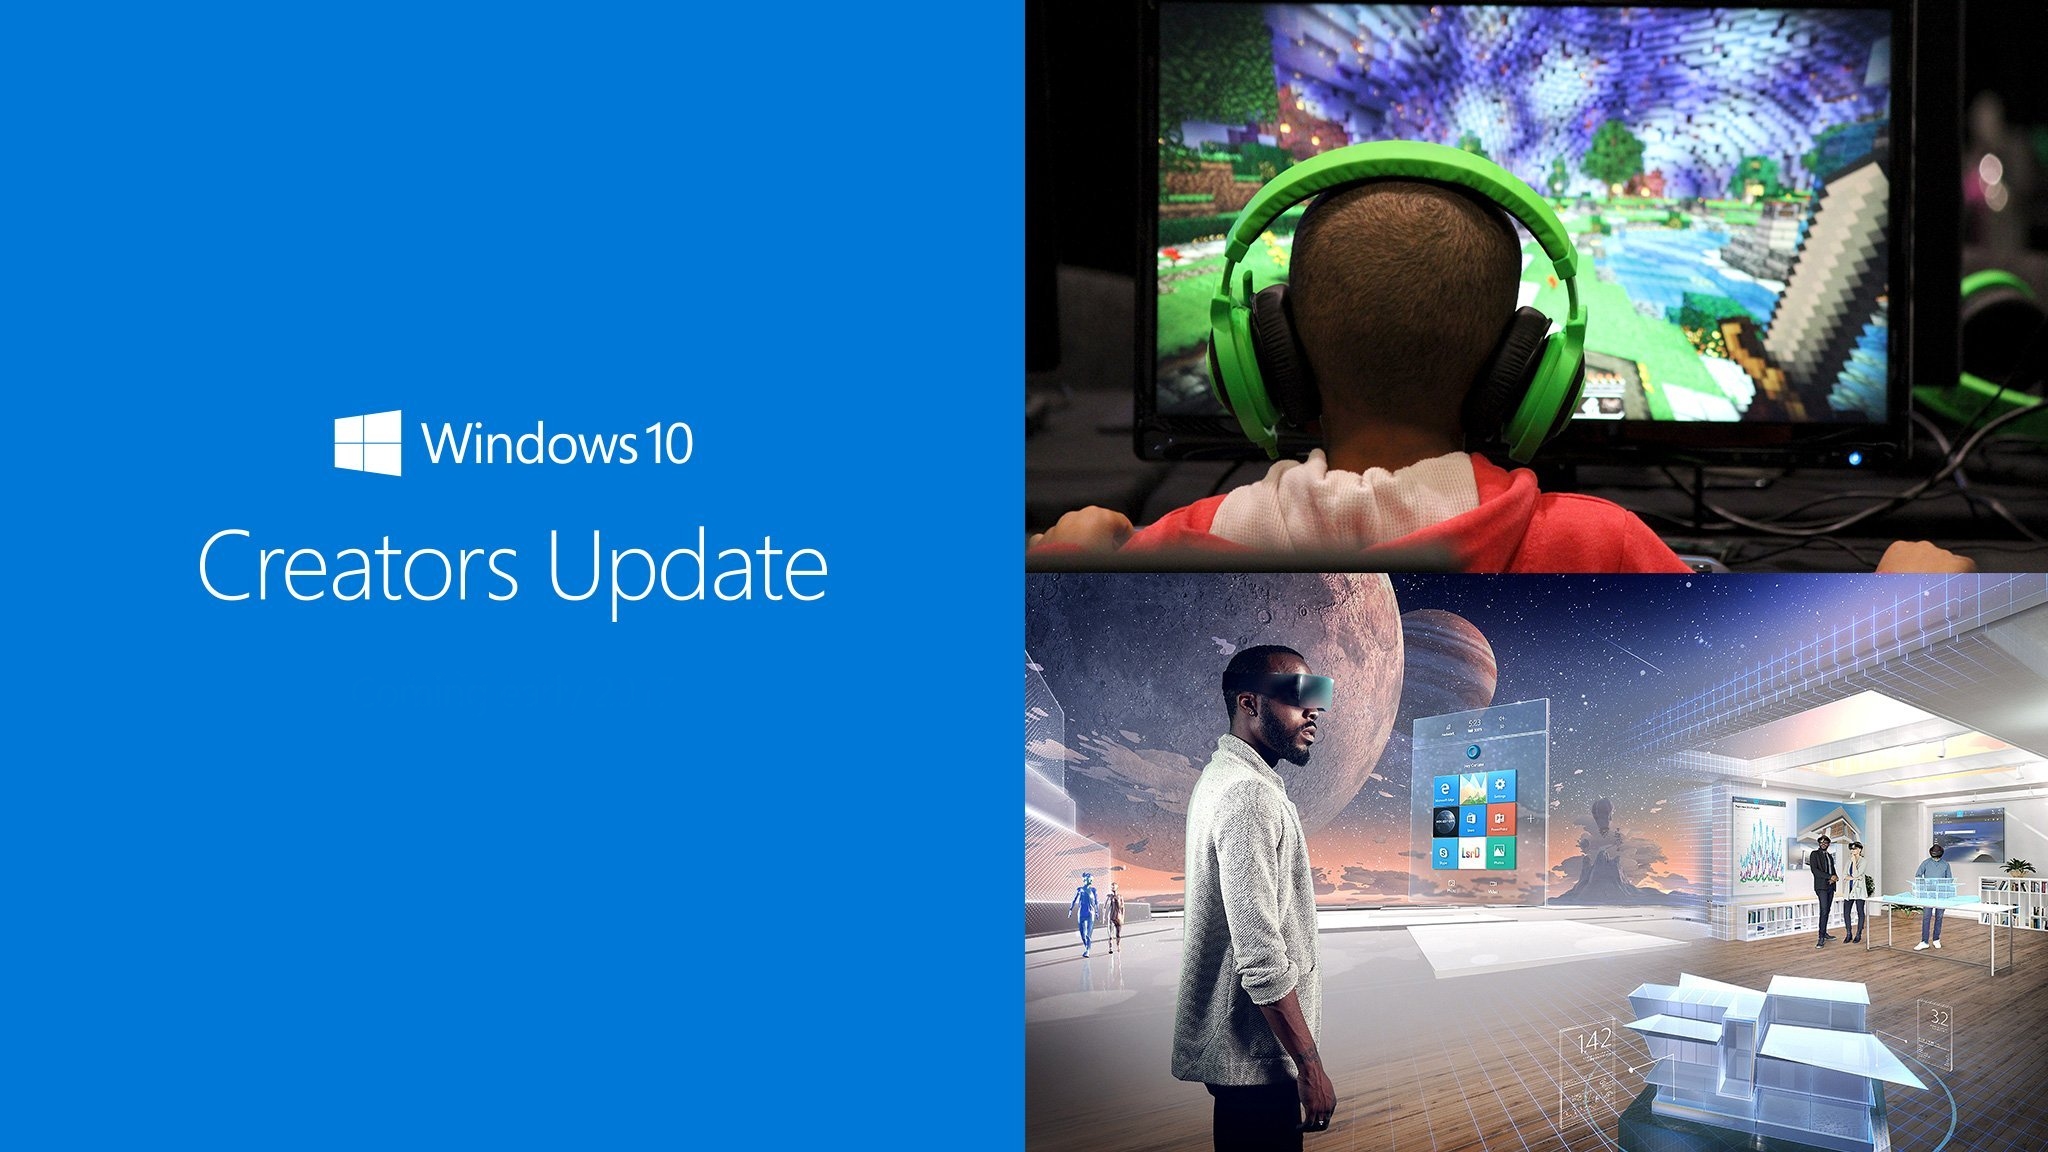 Windows 10 Creators Update officially starts rolling out on April 11, but you can download ISOs now